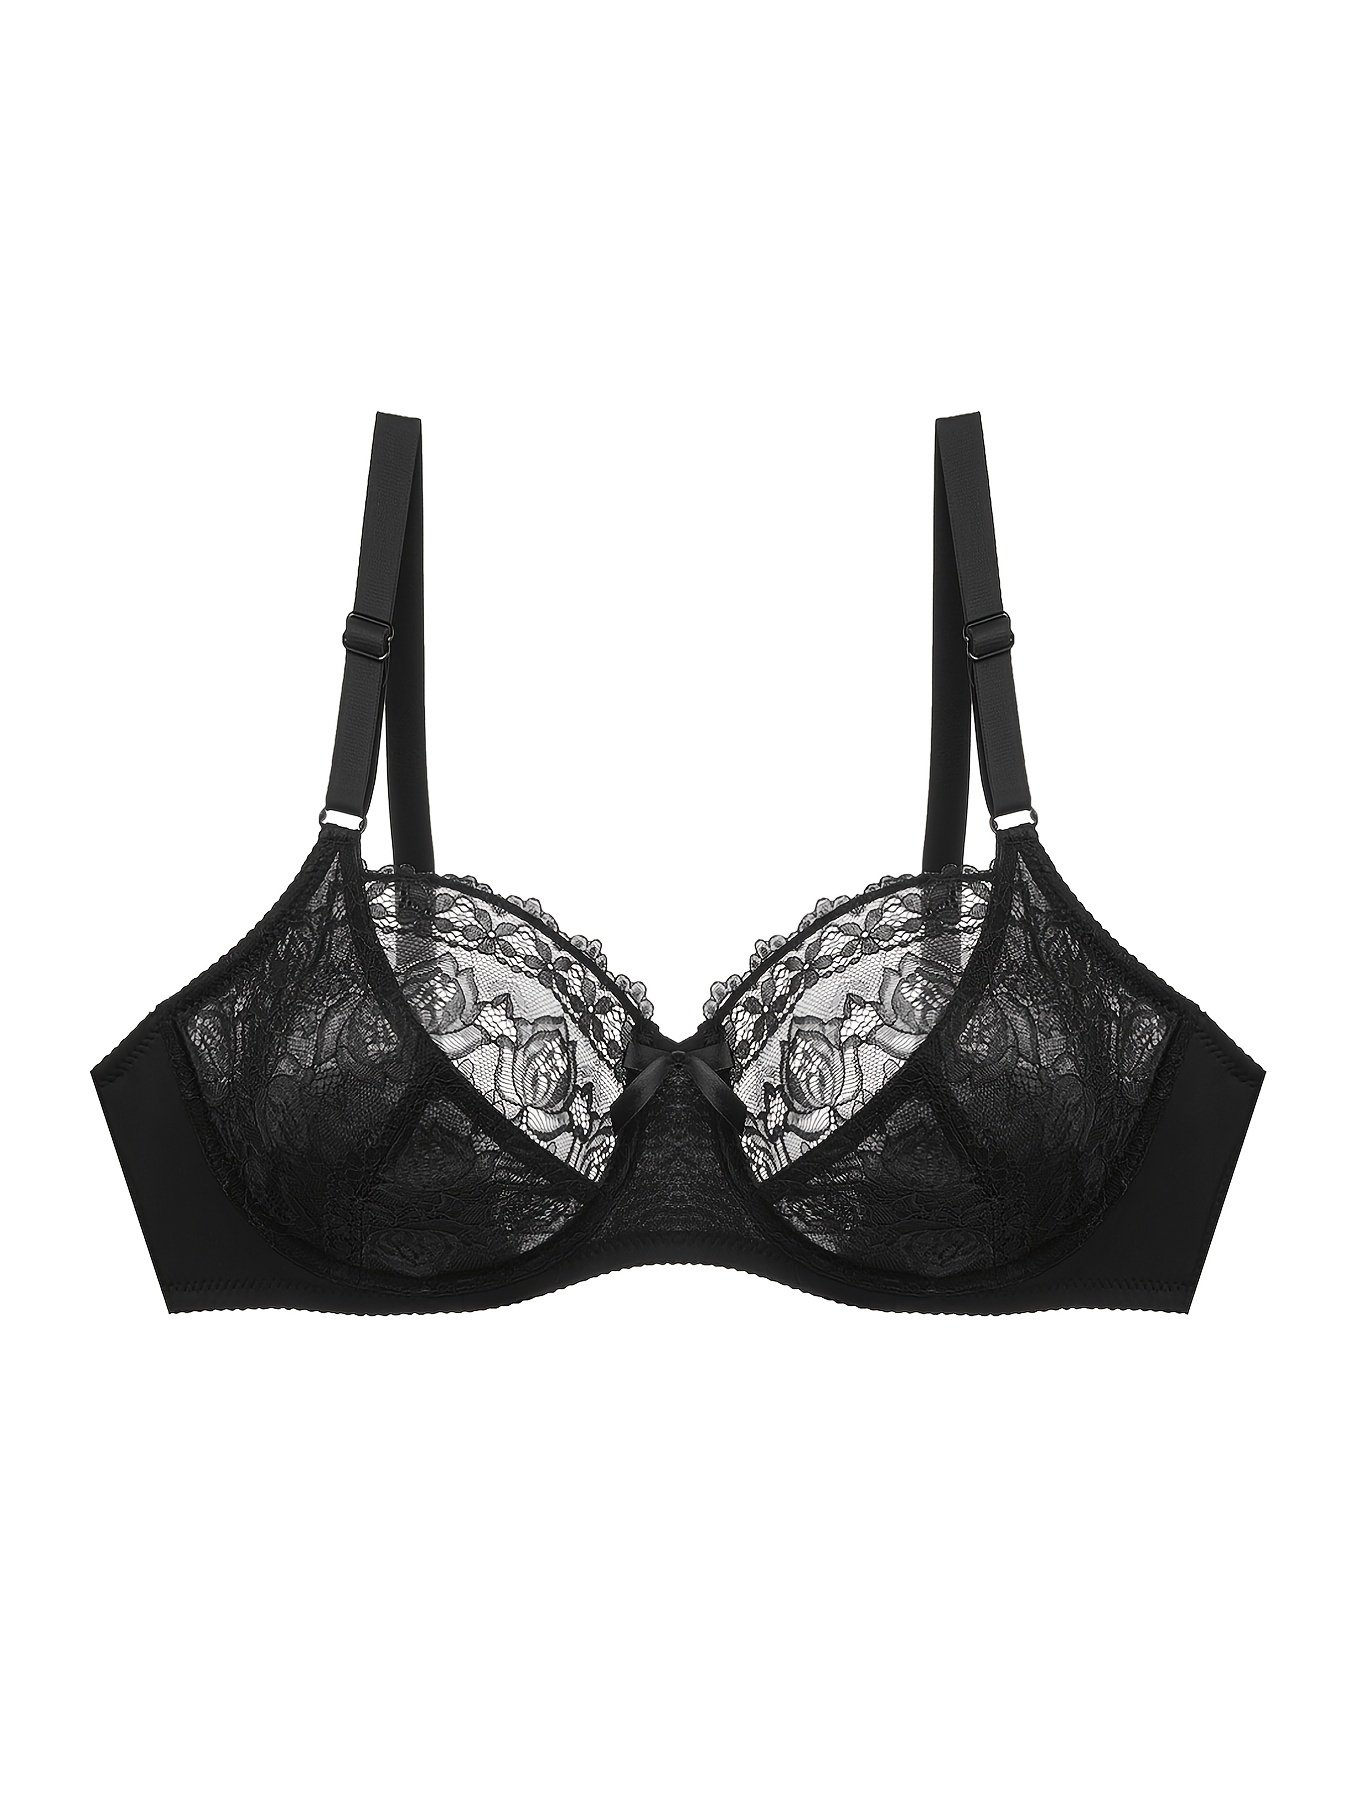 Women's Balconette Bra Push Up Plus Size Lace See Through Sexy